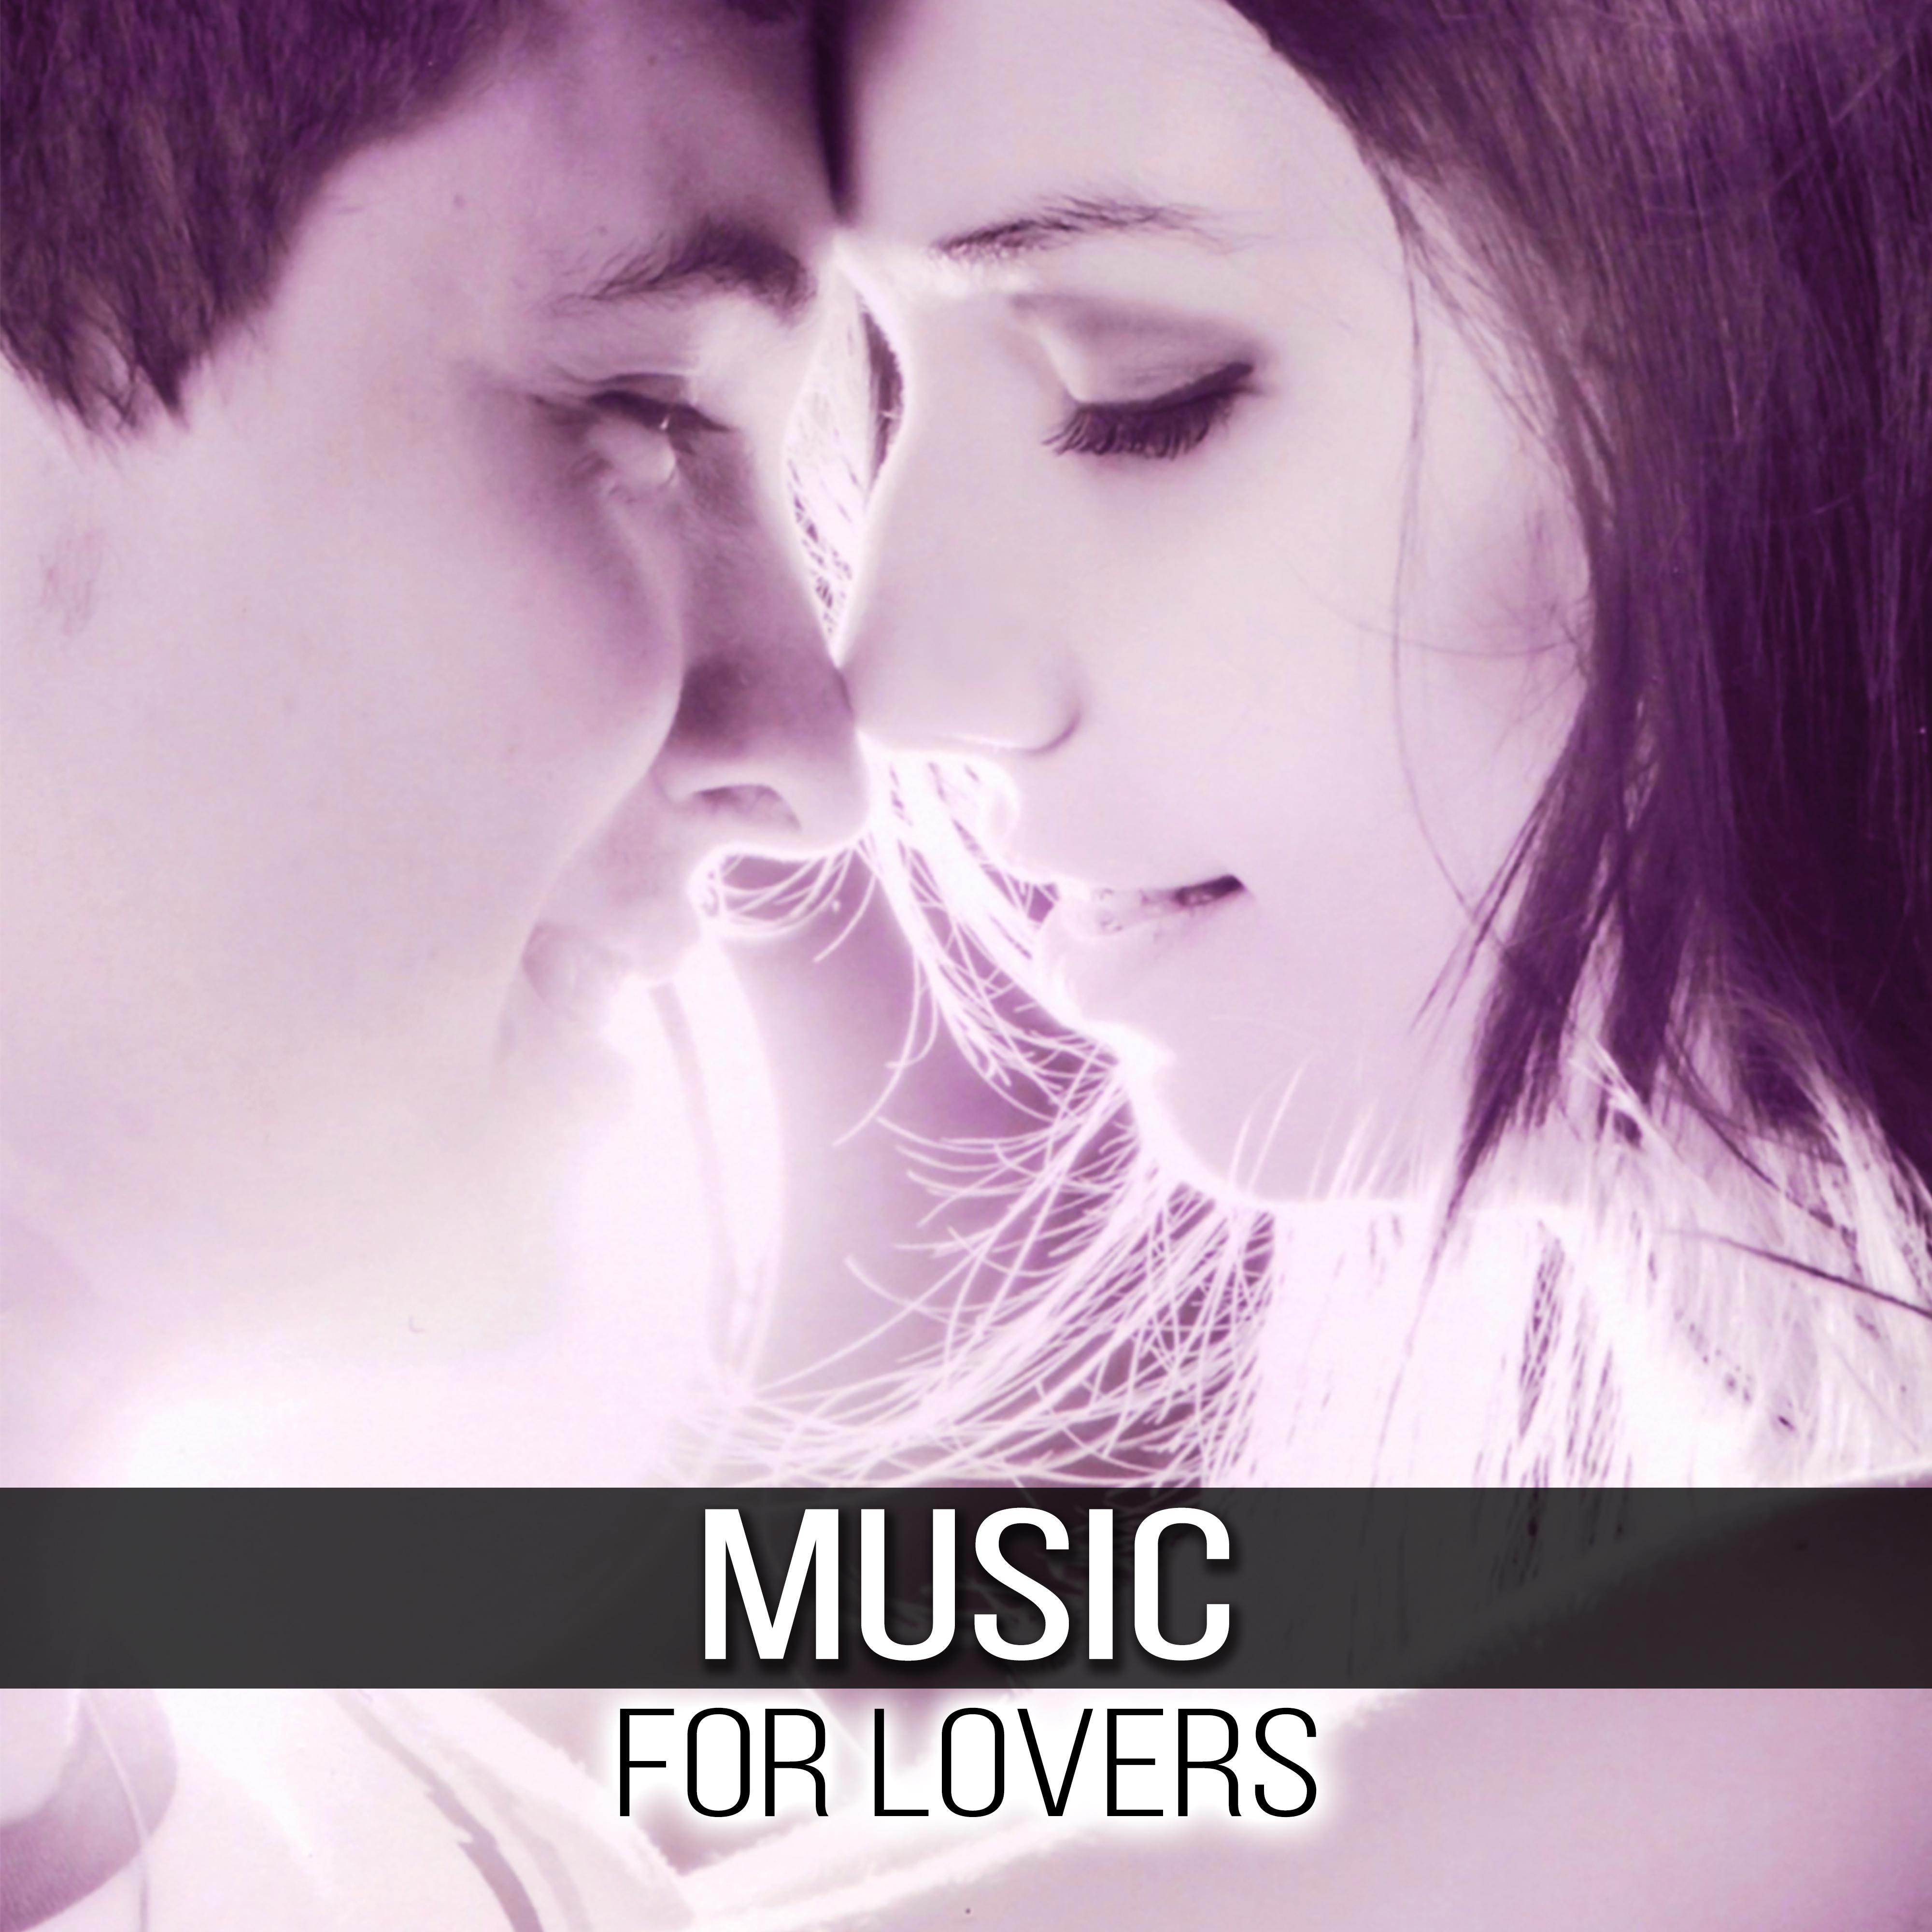 Music for Lovers -  Intimate Moments, Sensual Romantic Music for Lovers, Background Music for Dinner, Sensual Massage